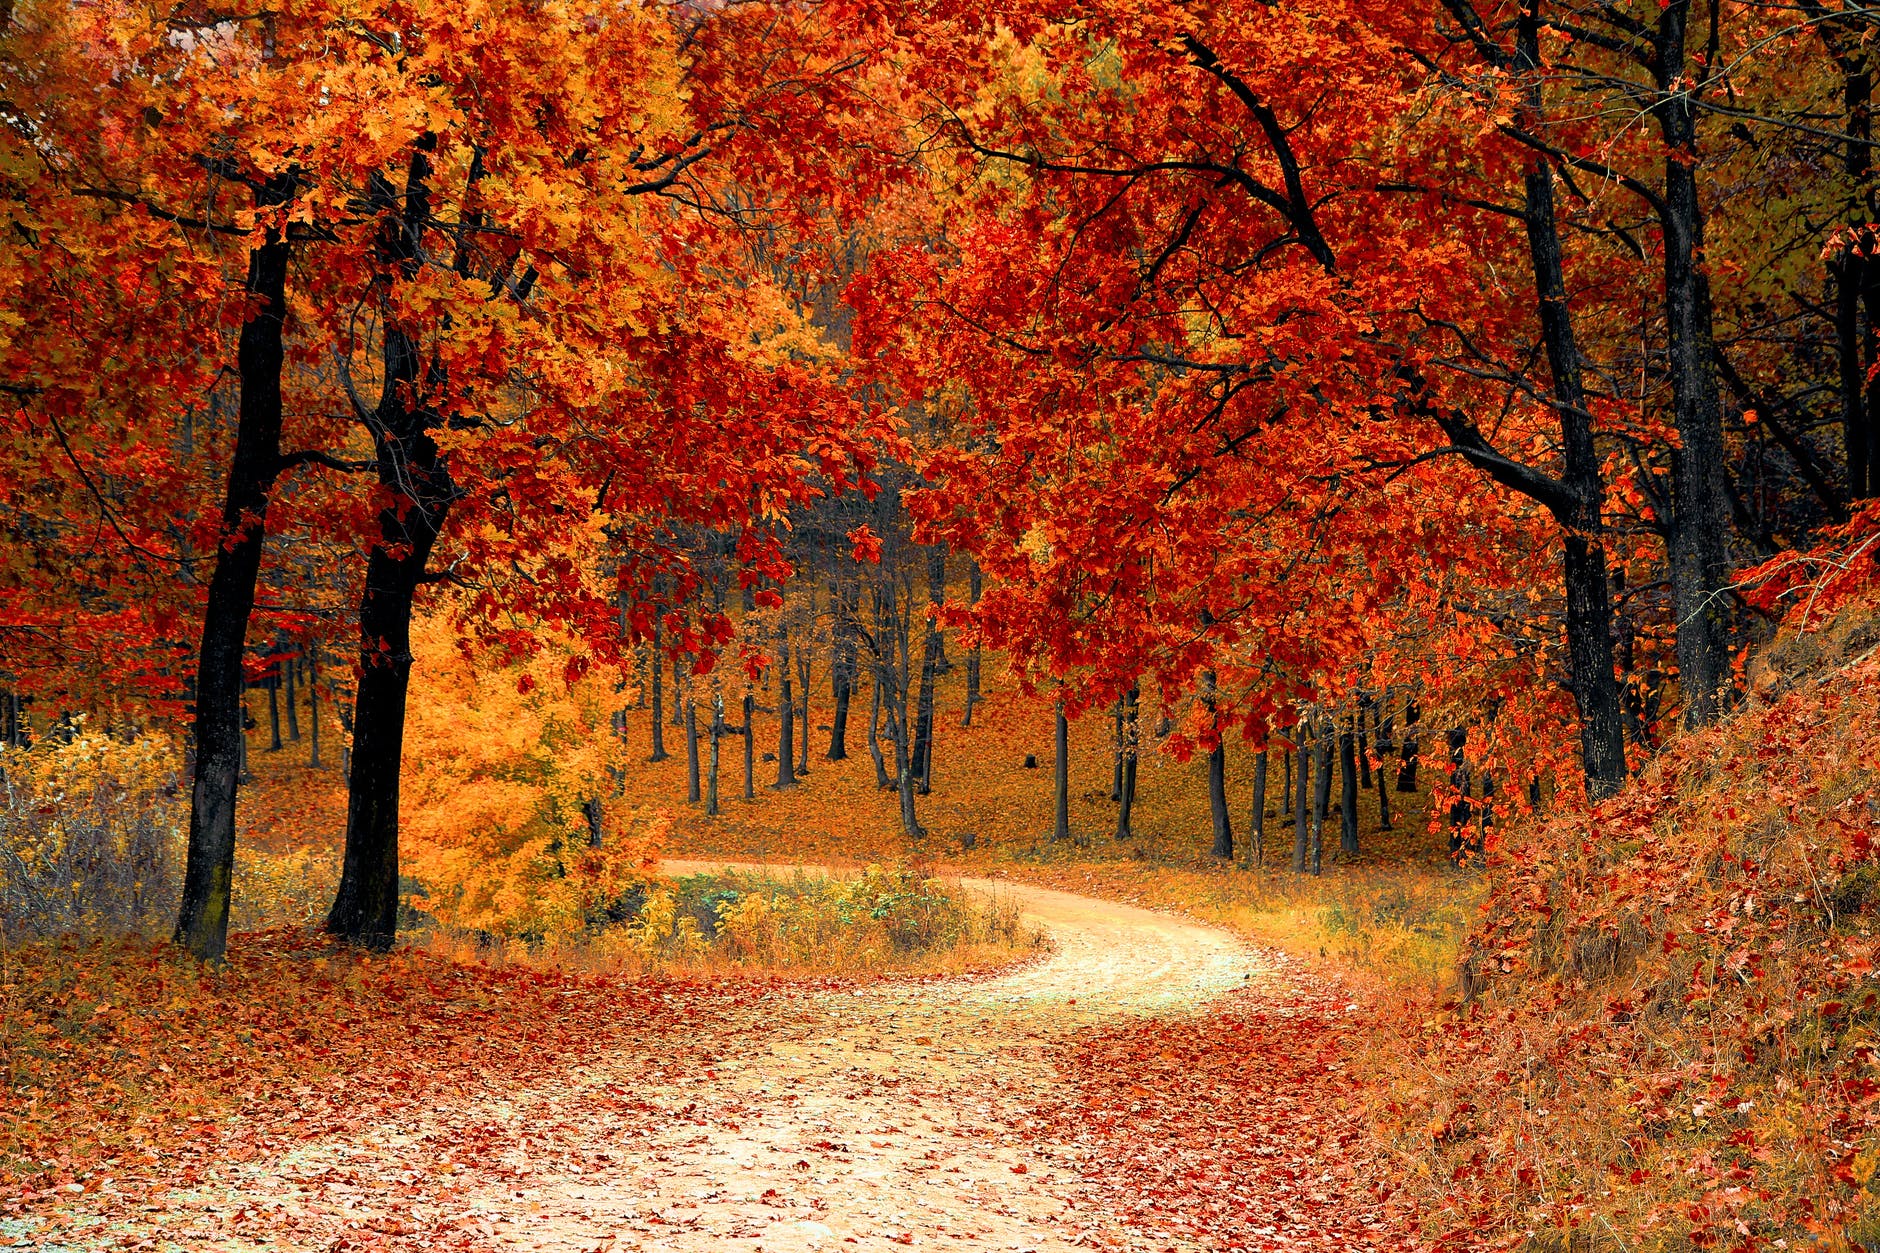 a road surrounded by trees in the fall